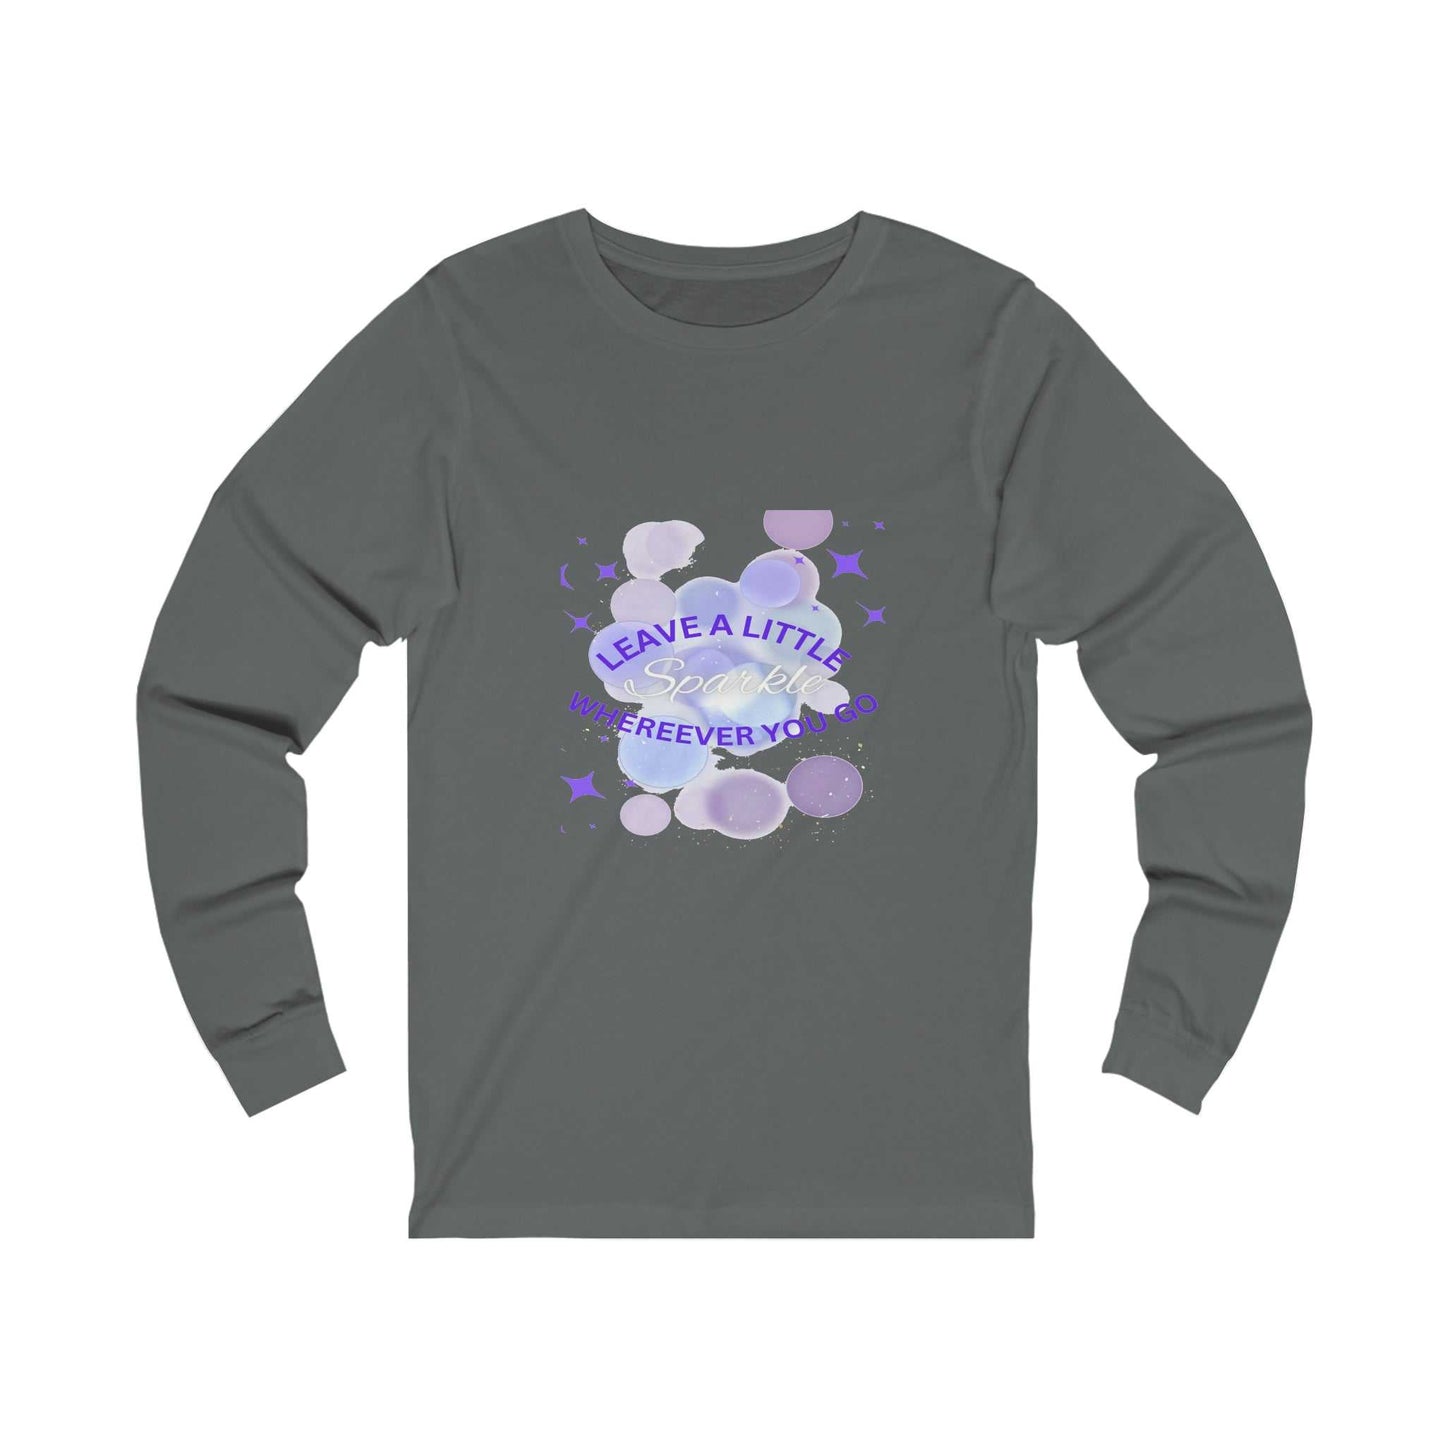 Leave a little Sparkle Unisex Jersey Long Sleeve Tee Long Sleeve T-shirts and Joggers Long-sleeve Good Vibes Daily Lab 44